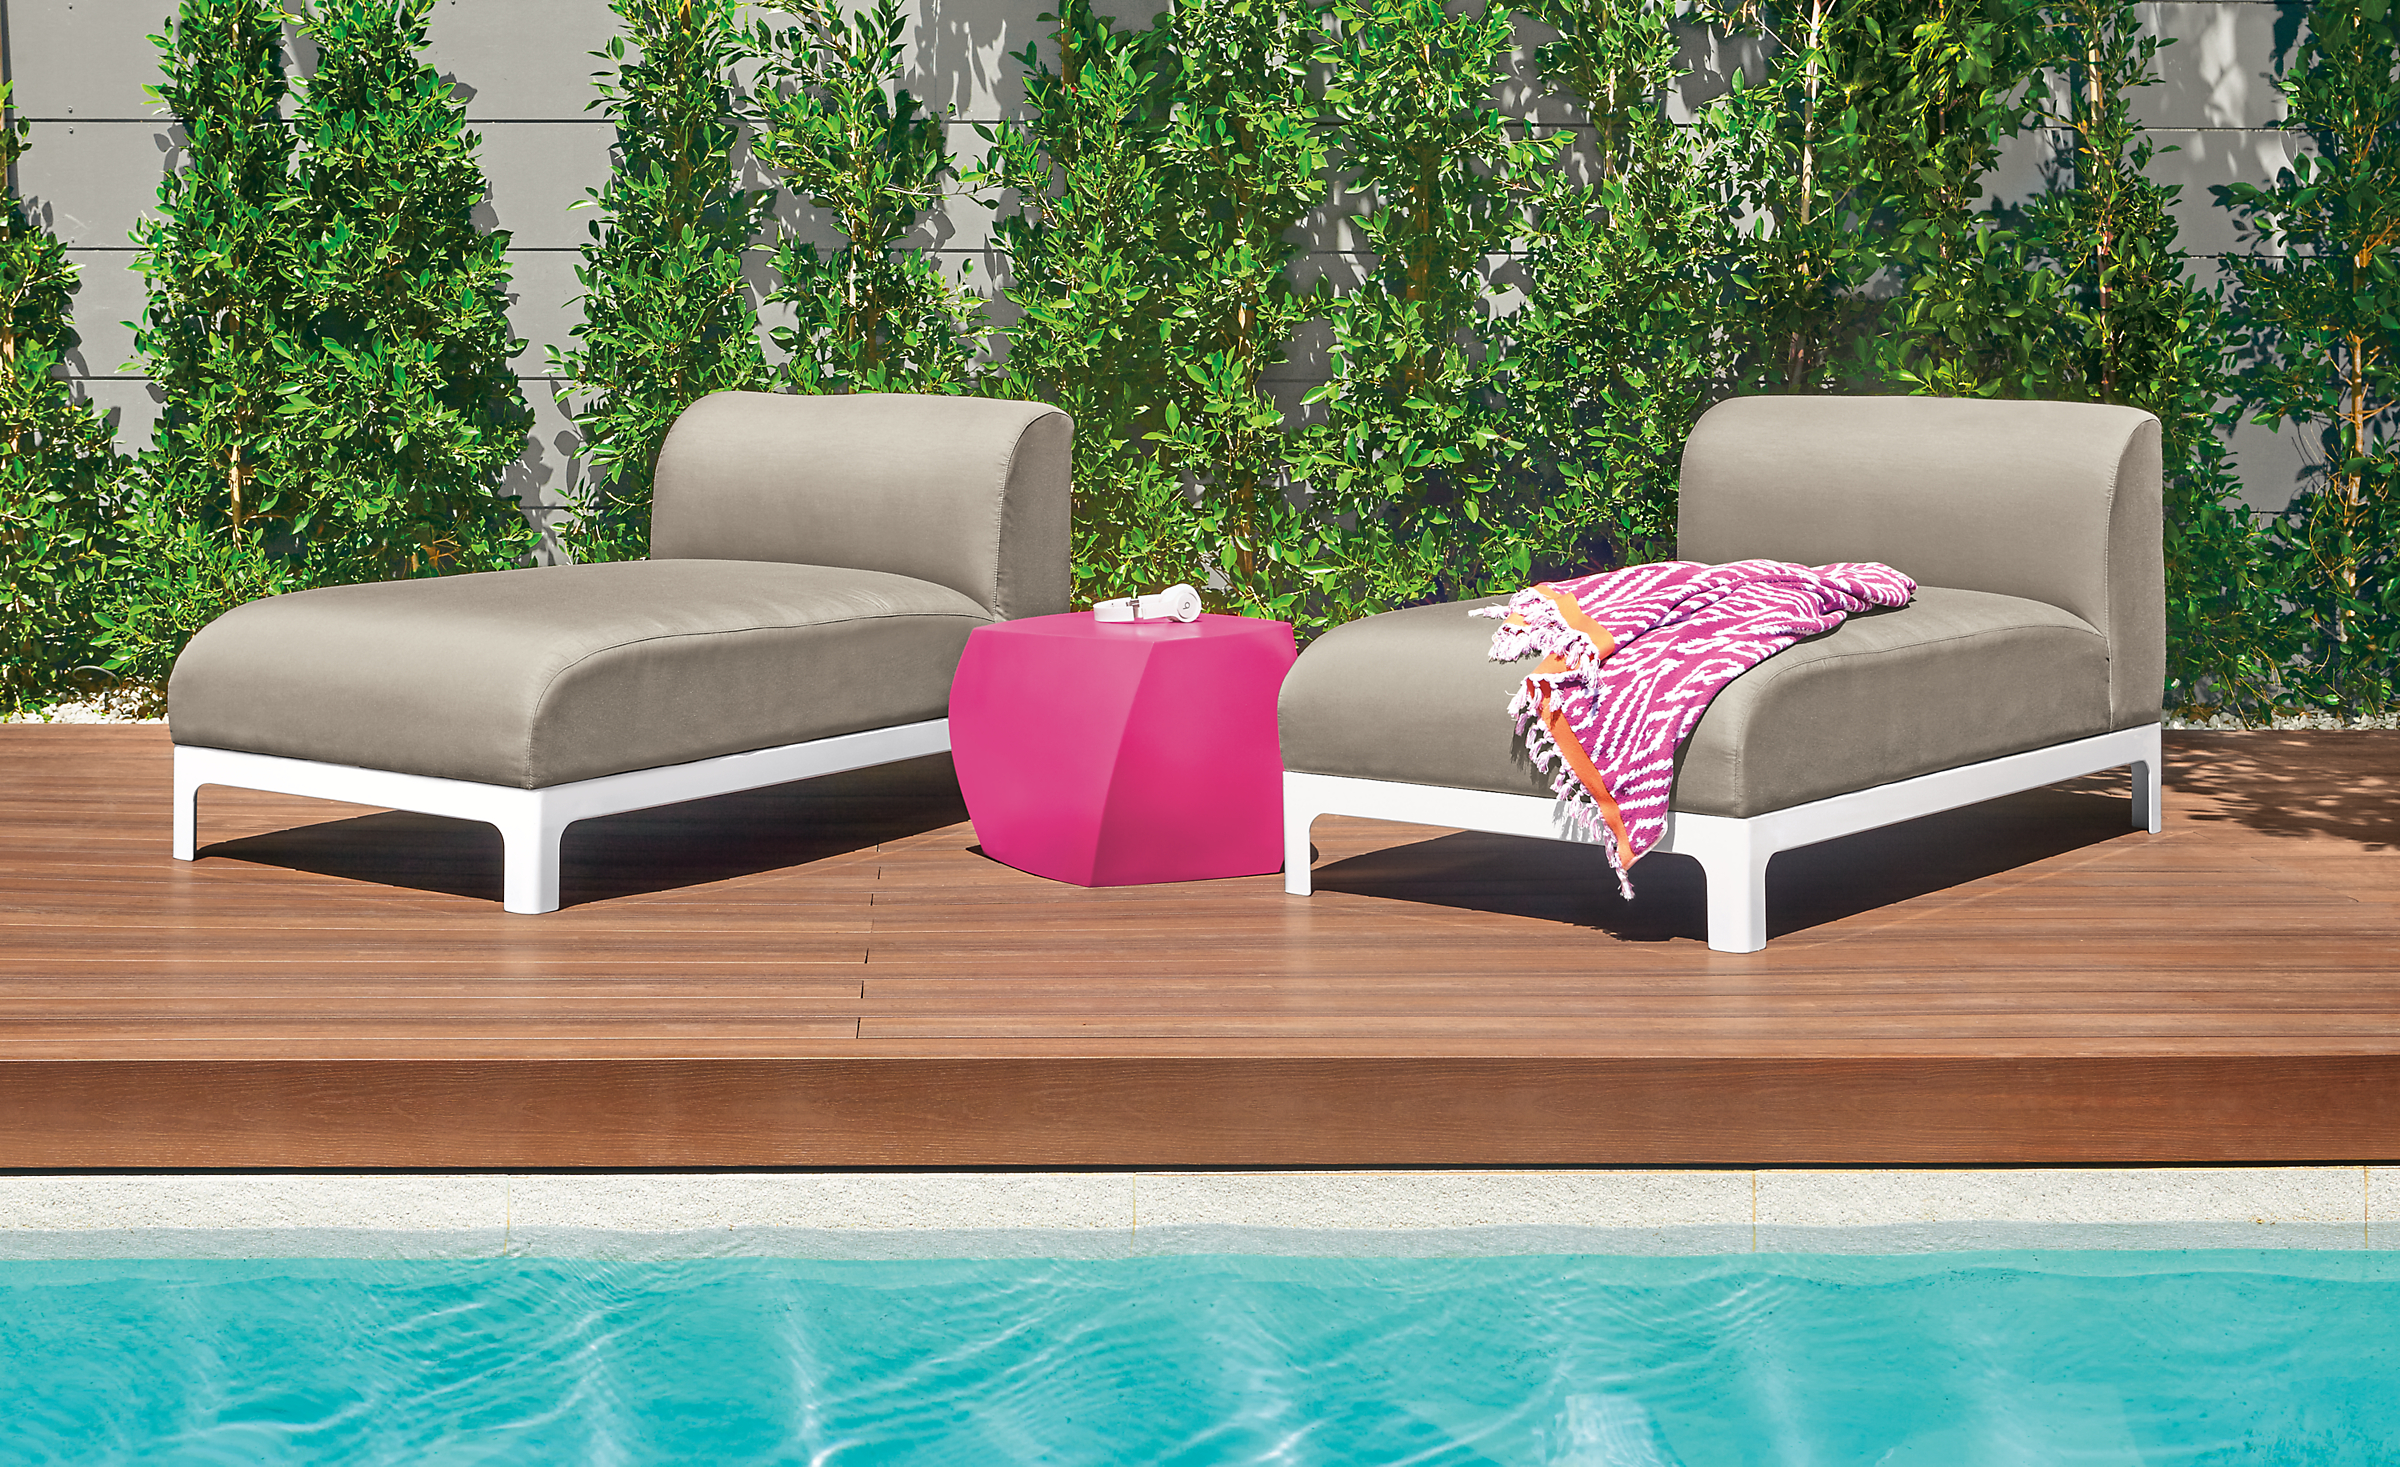 Detail of two Crescent outdoor chaises by pool.